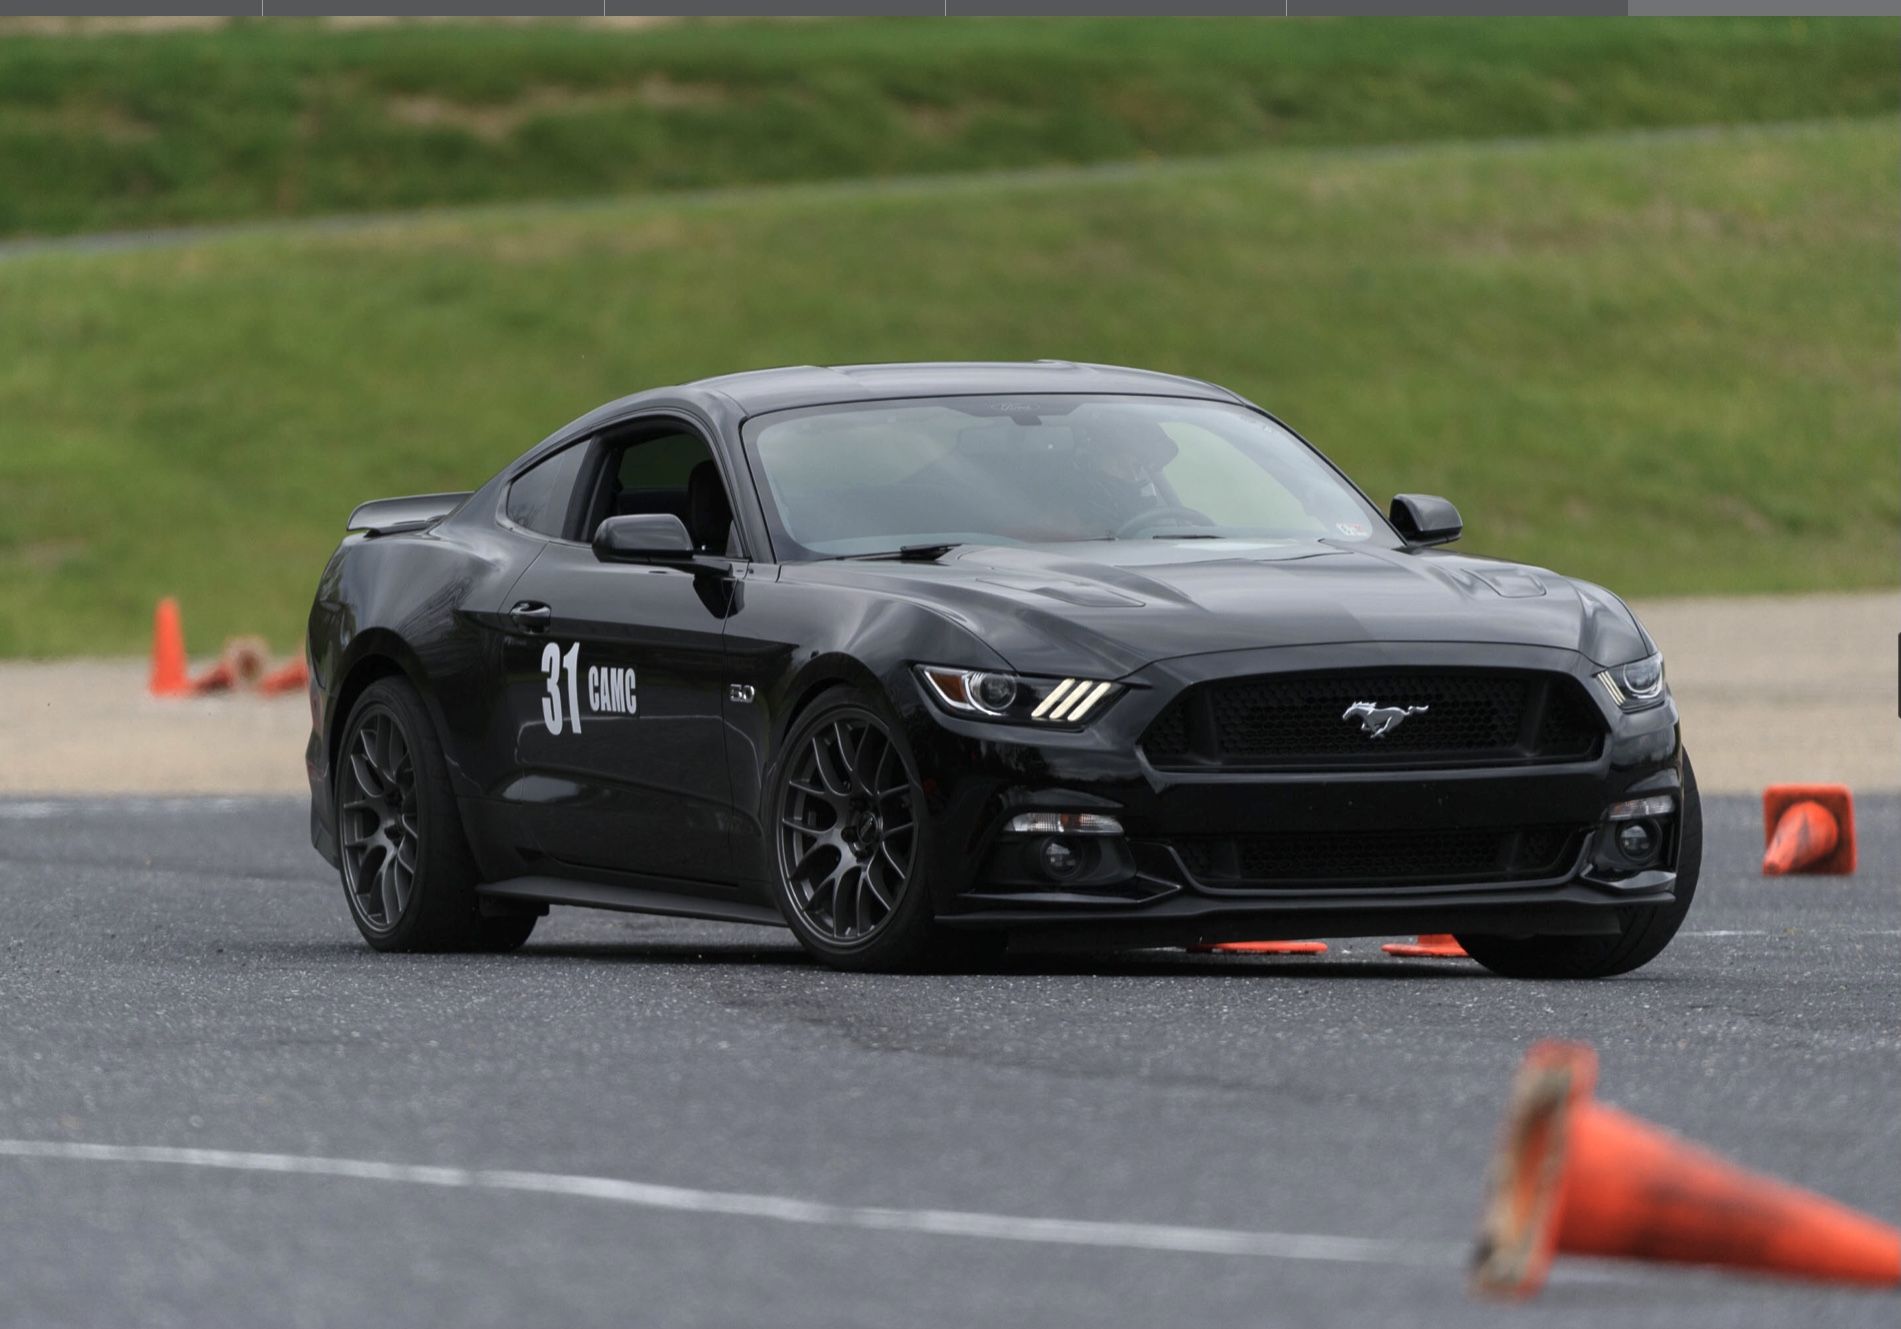 27 Awesome Gt350 exterior mods Trend in This Years